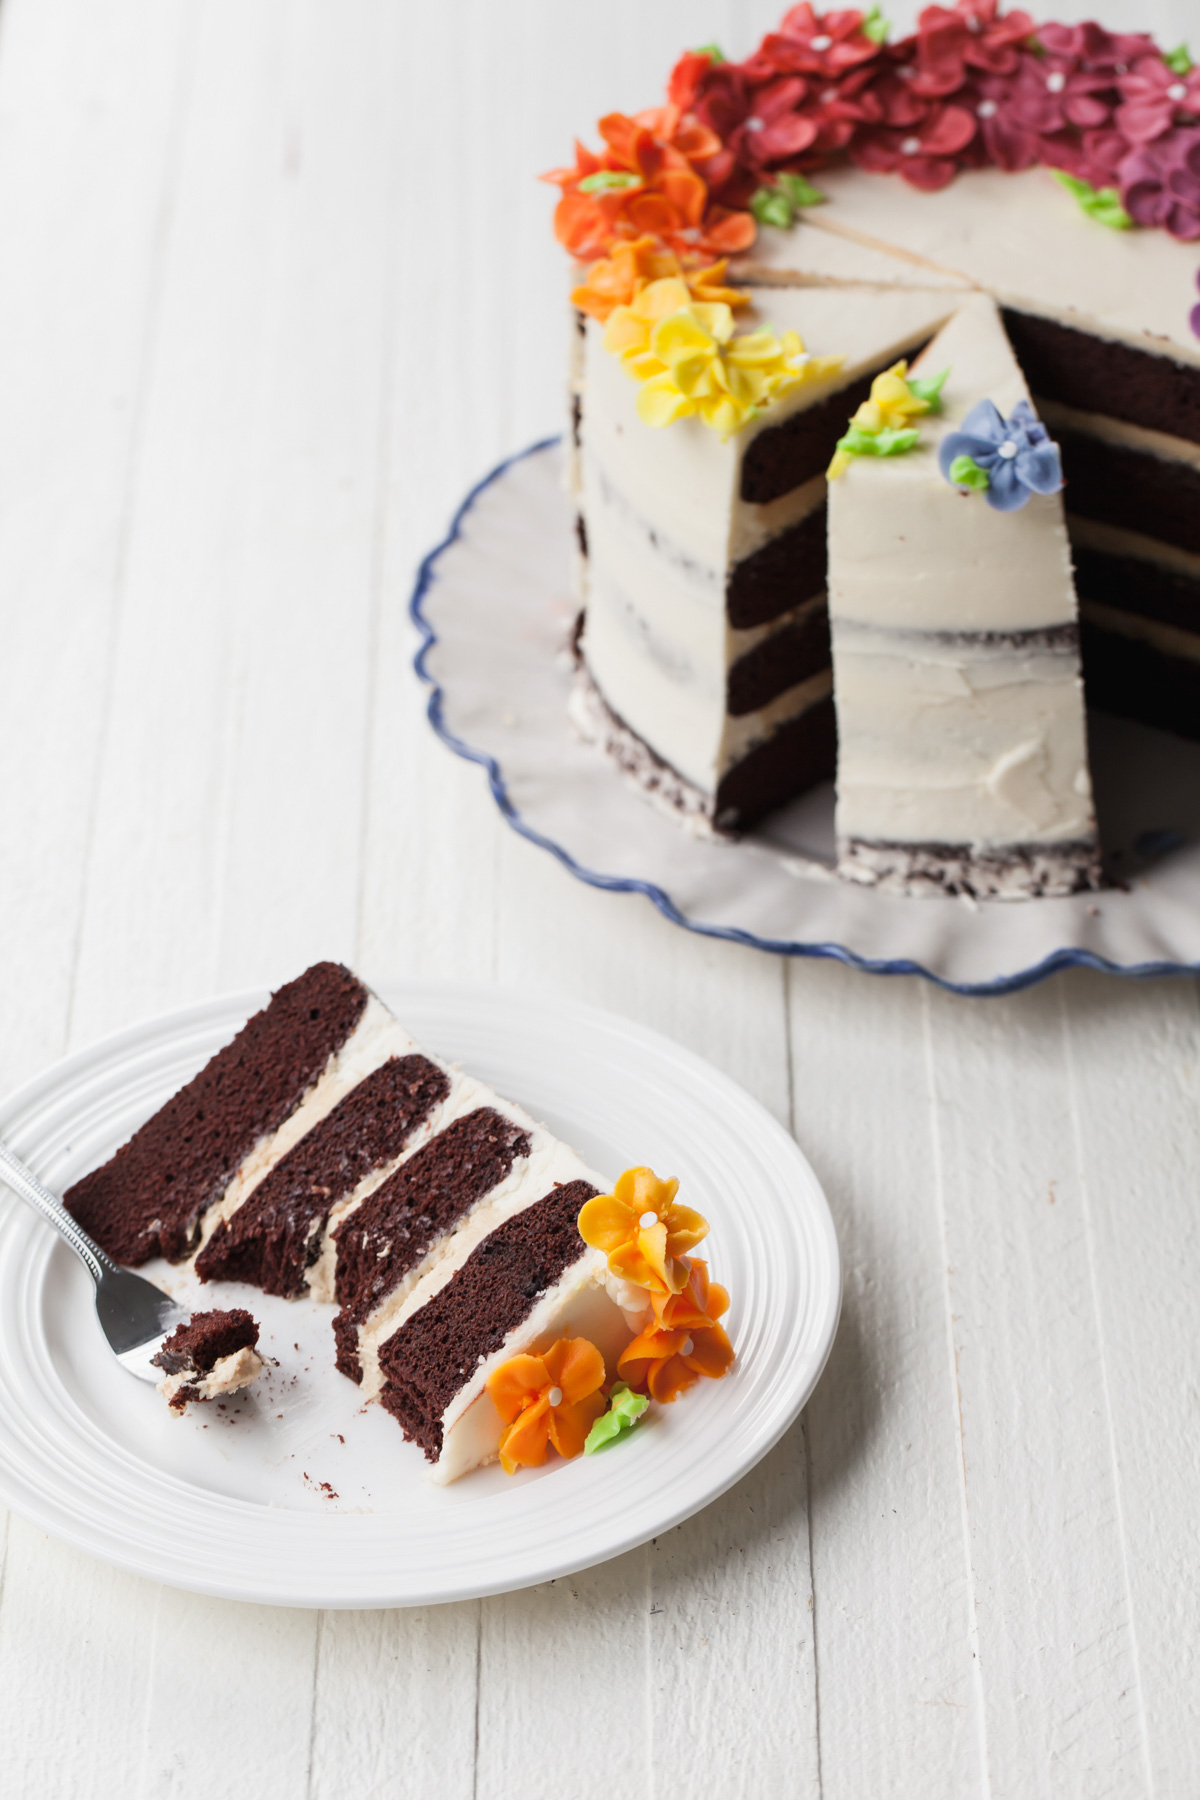 A sliced chocolate layer cake with colorful buttercream flowers